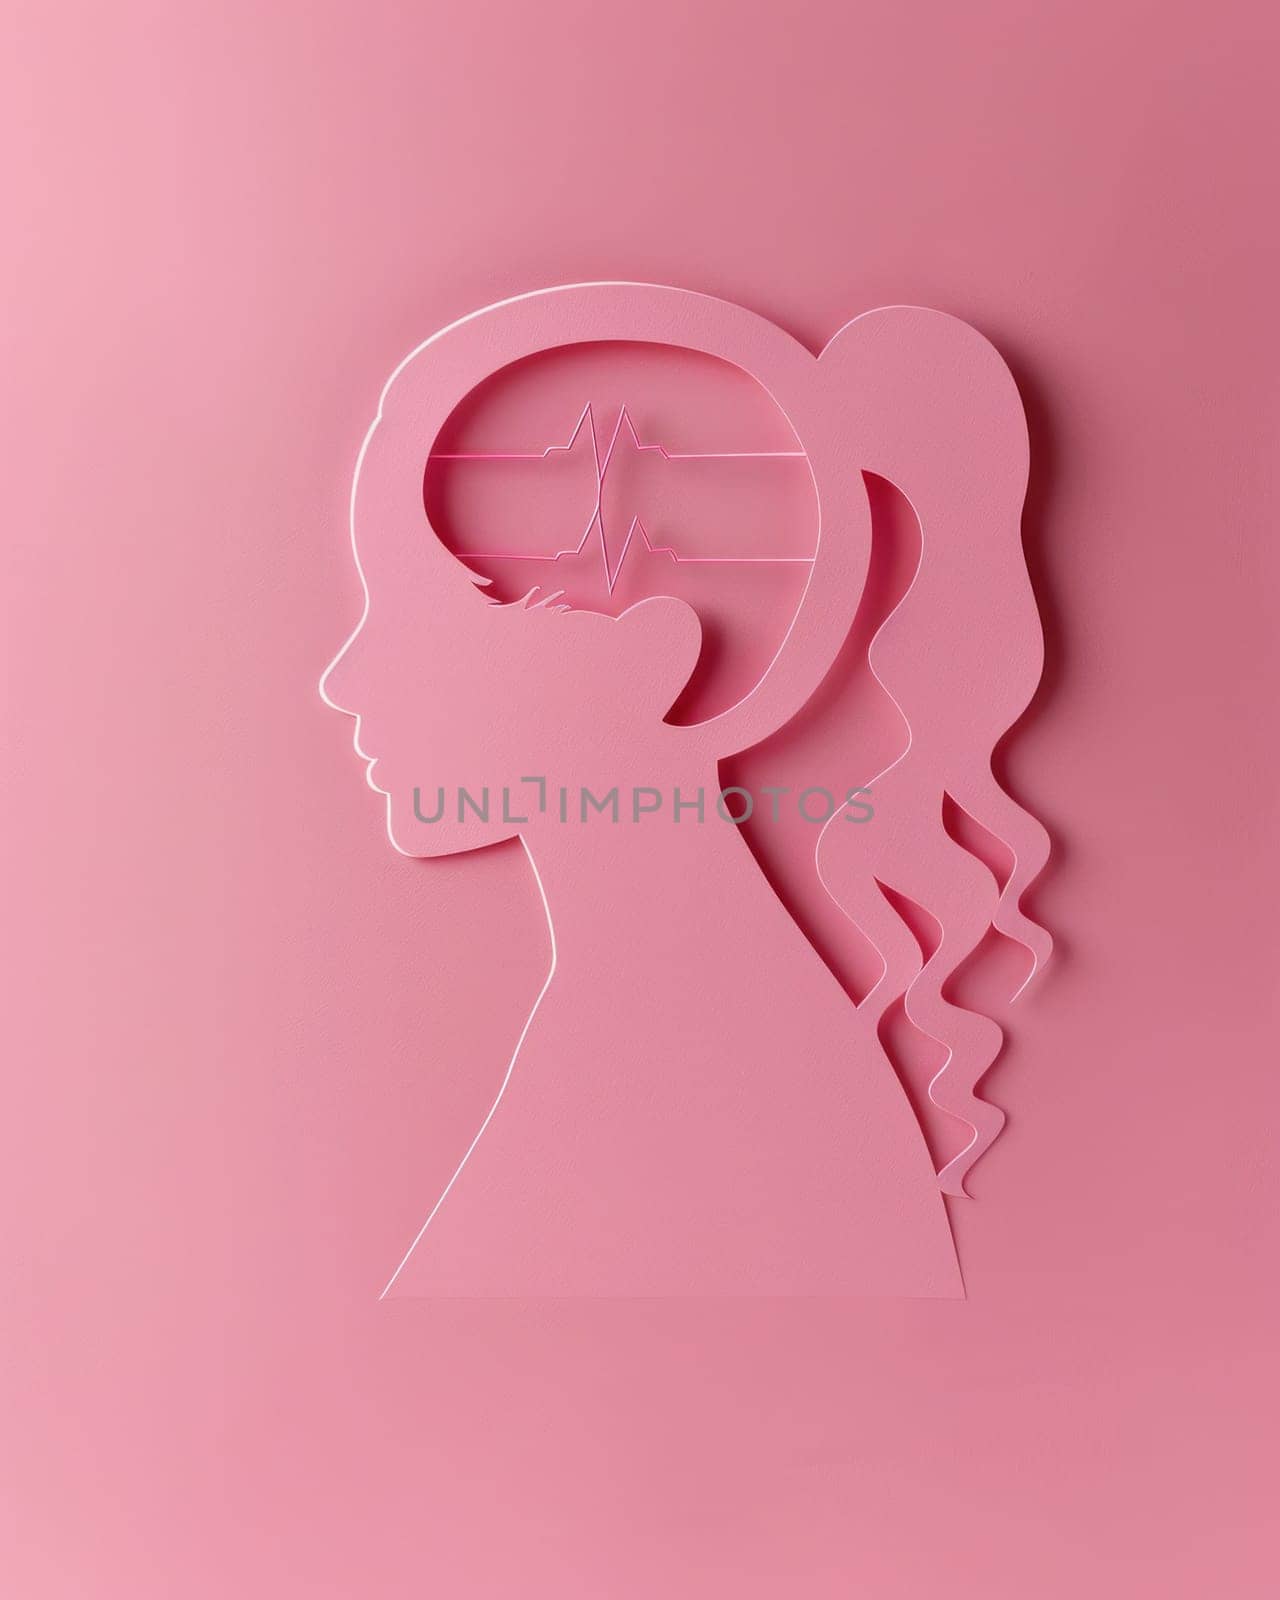 Woman's head with ponytail paper cutout on pink background beauty and fashion concept illustration